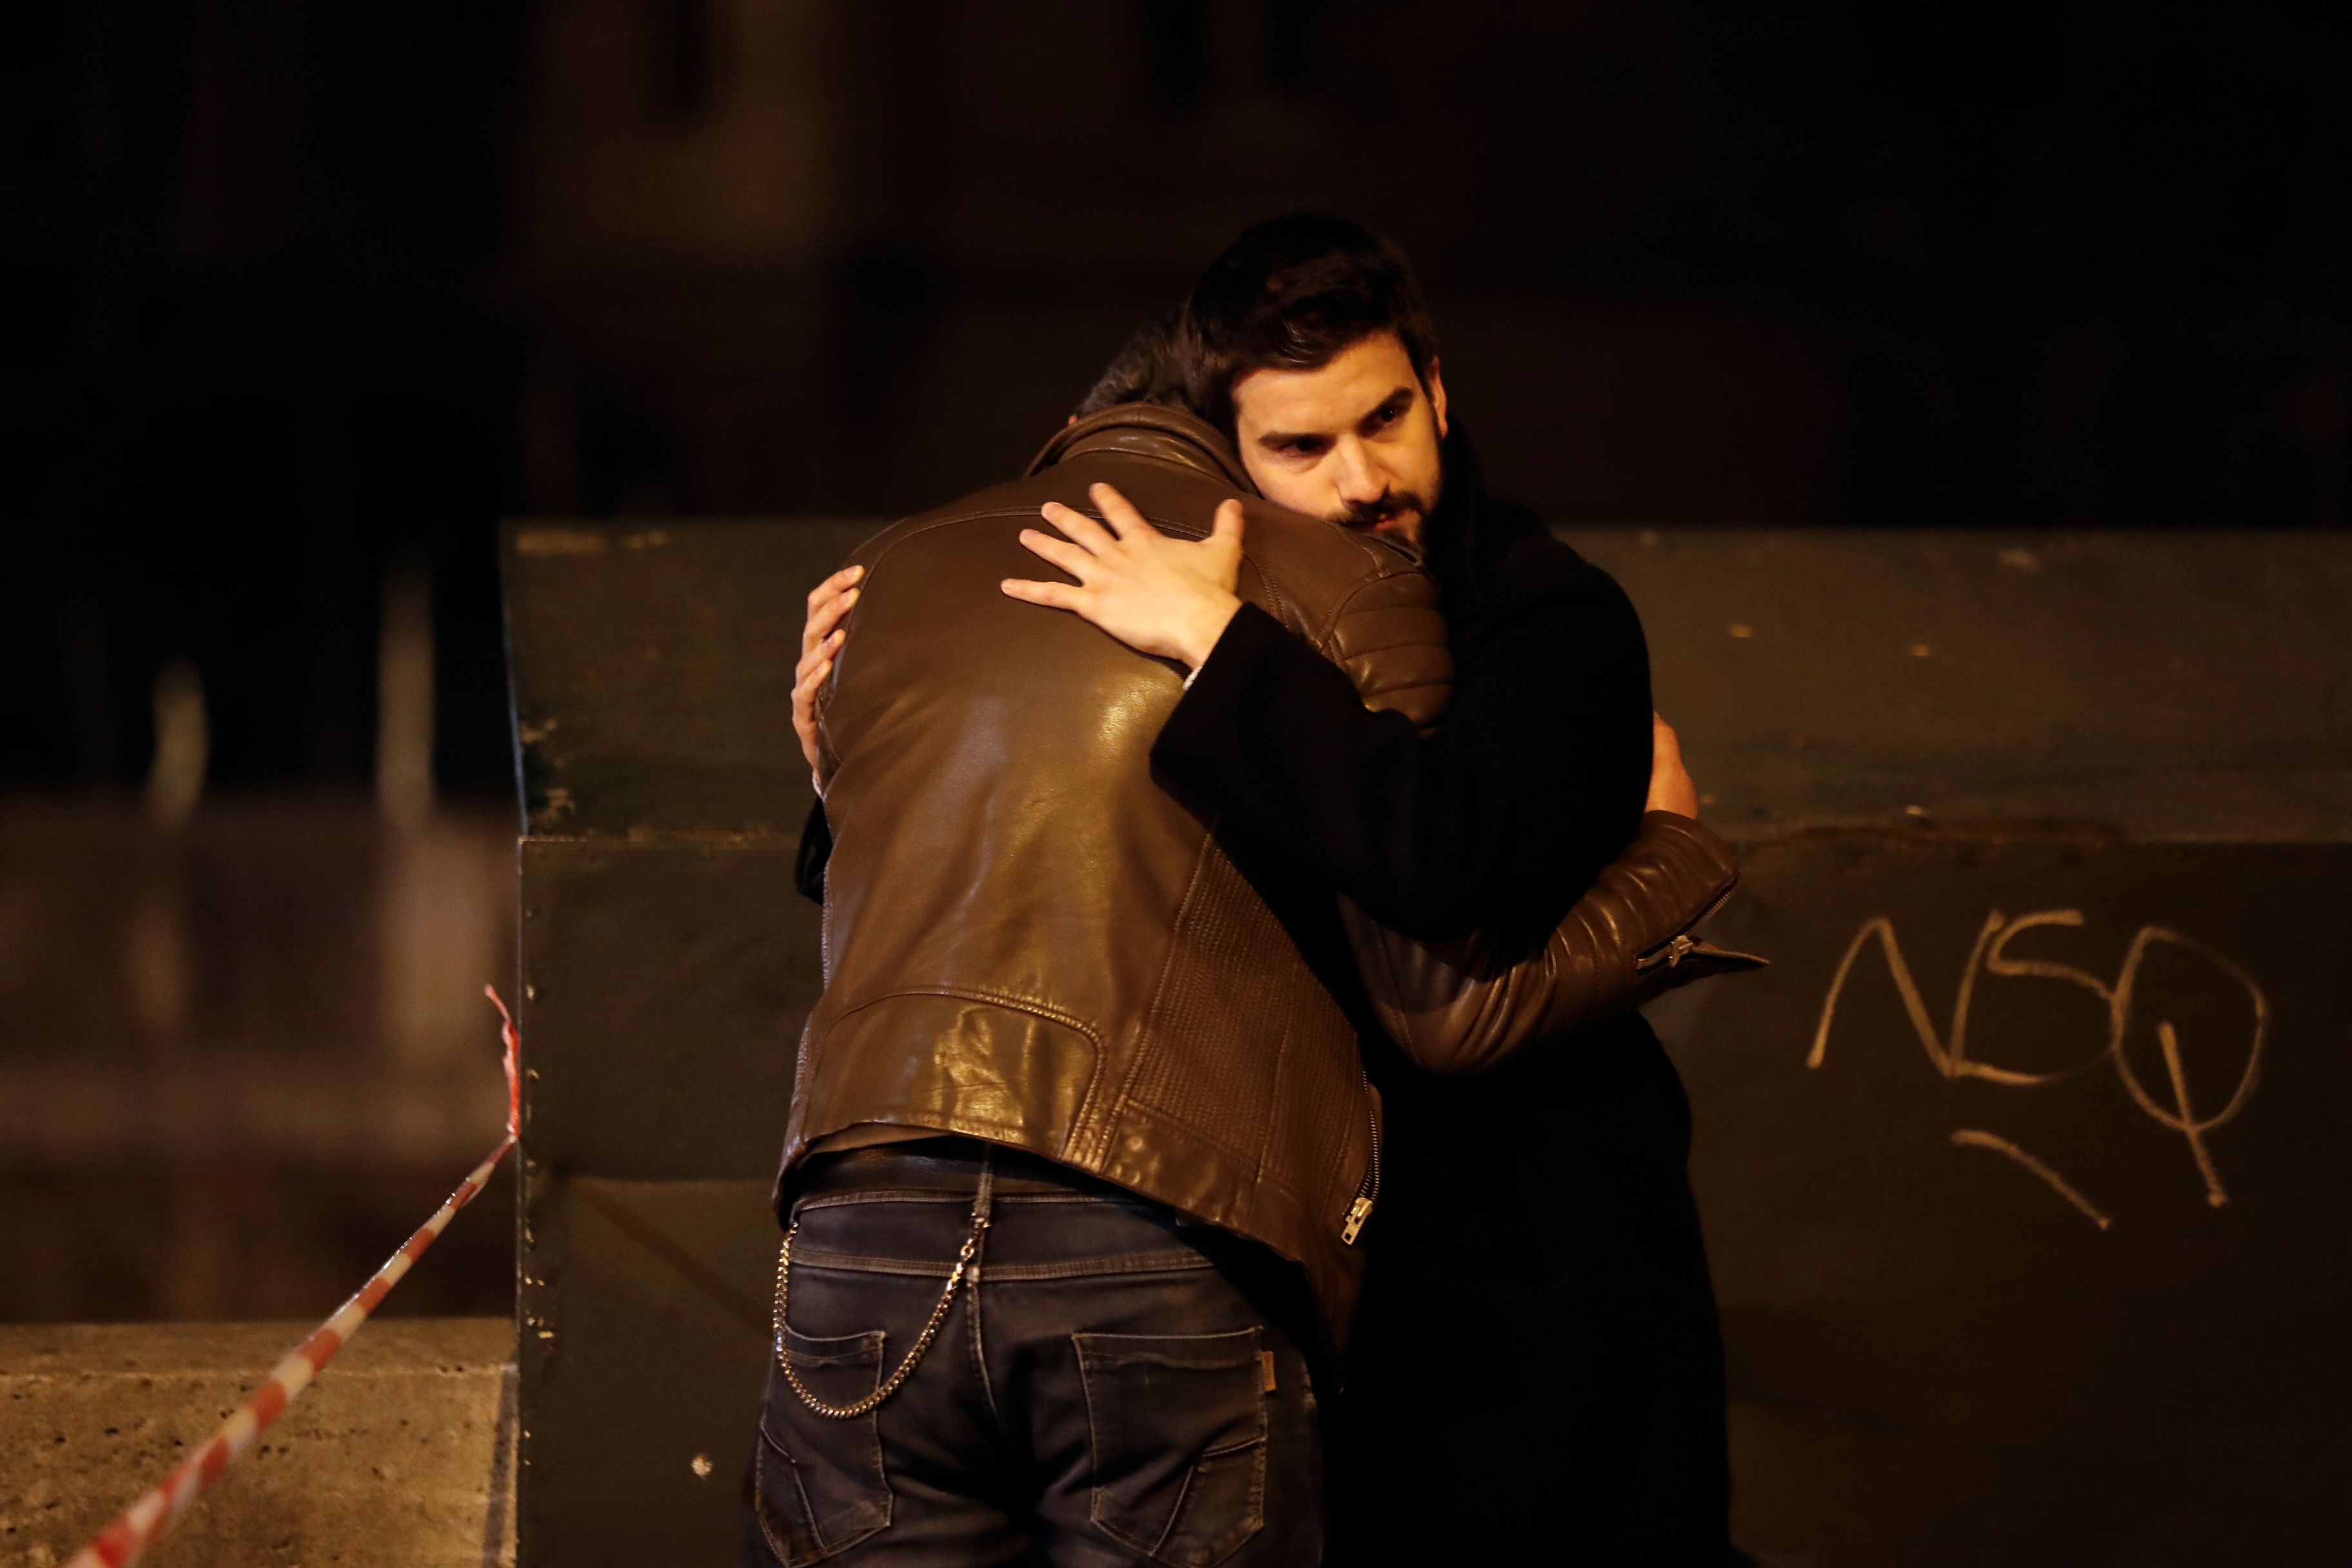 Two men hug near Notre Dame Cathedral in Paris early Tuesday morning, after a huge fire that devastated the building.